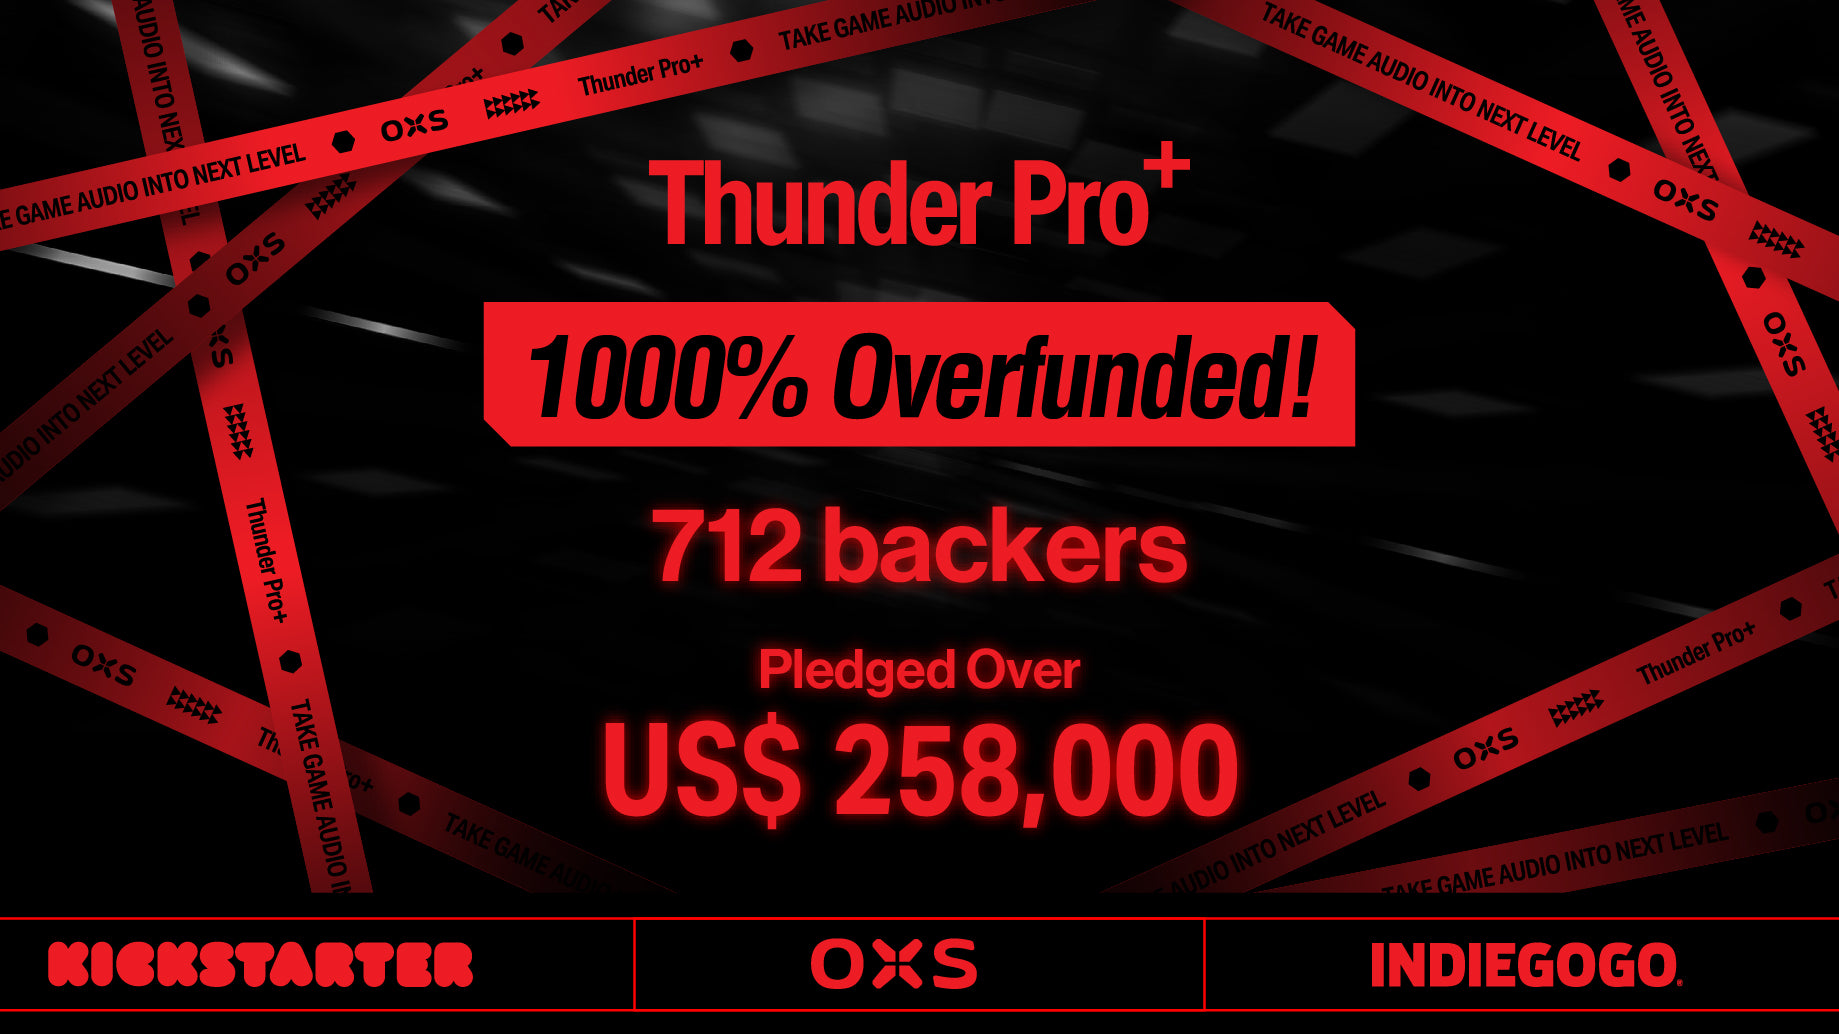 OXS Thunder Pro+ Crowdfunding Success: From Backers to Believers